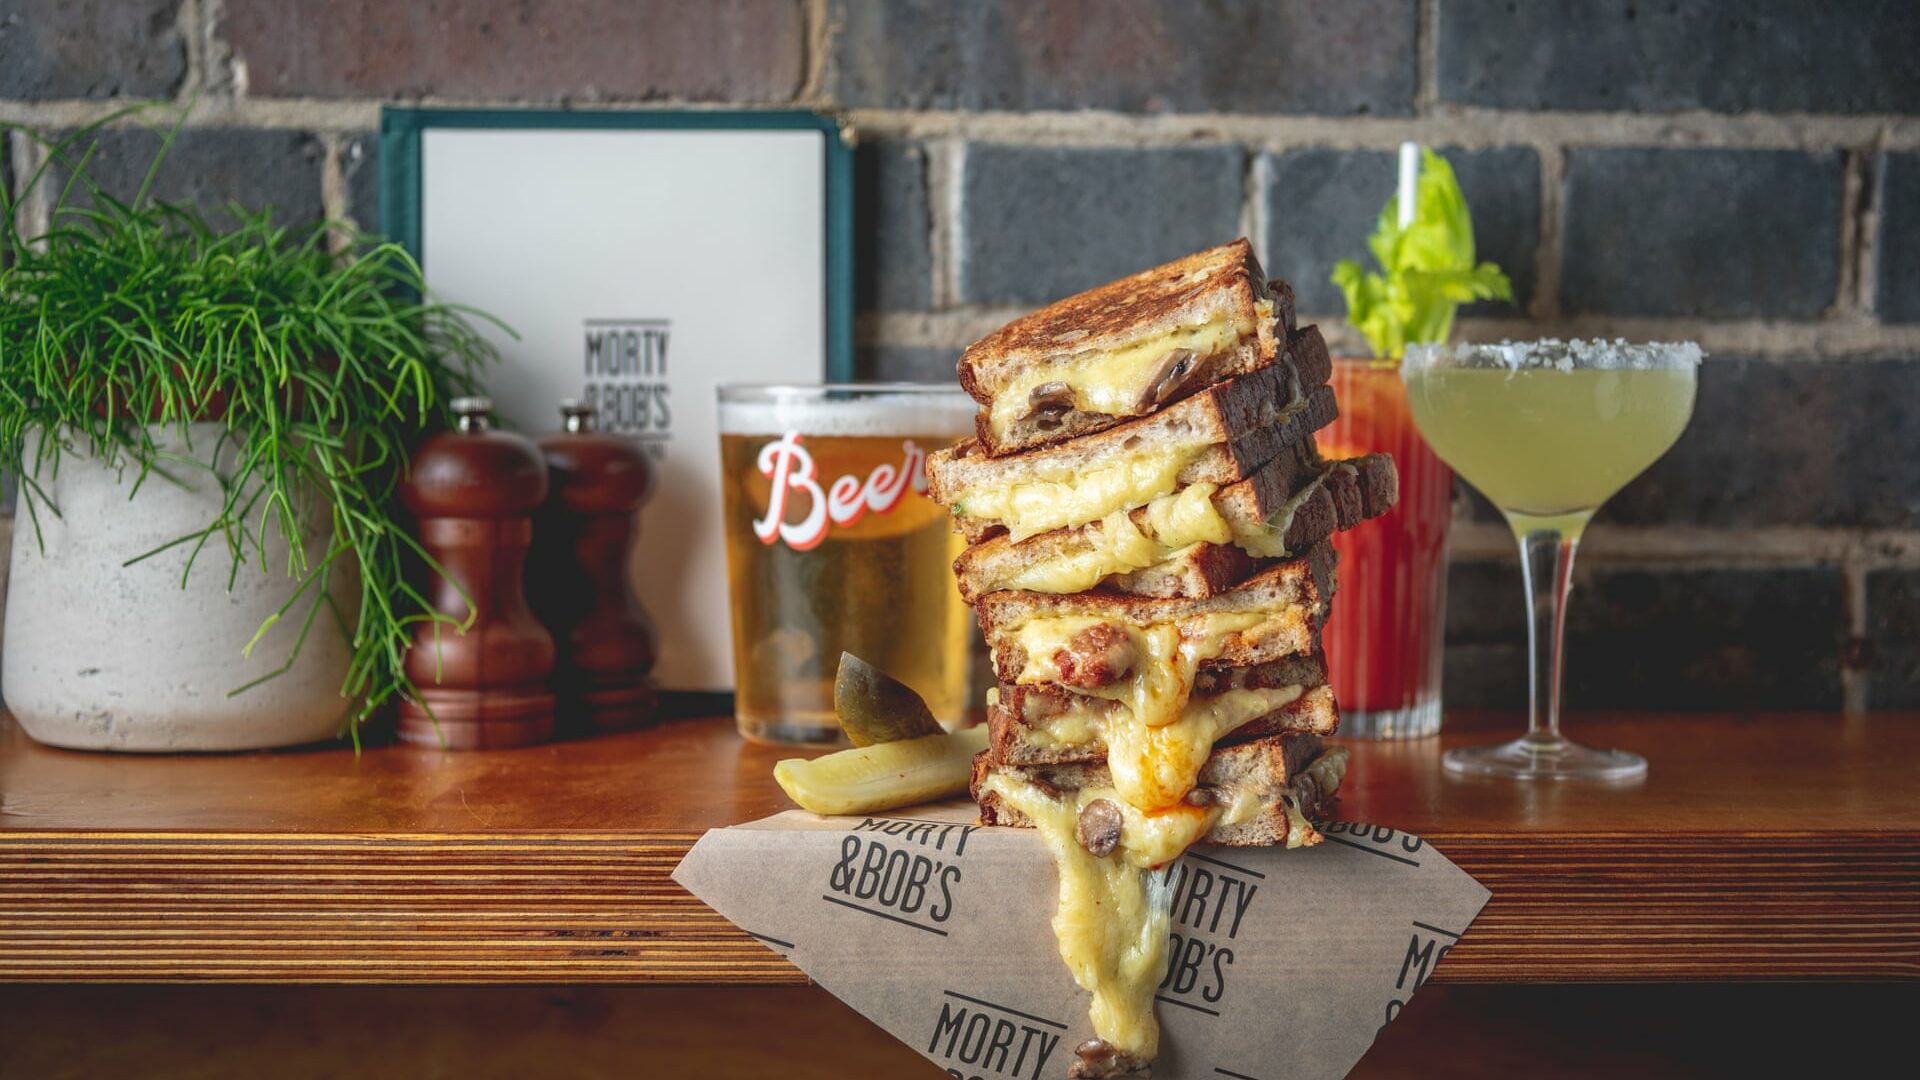 Overloaded cheese toastie at Morty and Bob's King's Cross